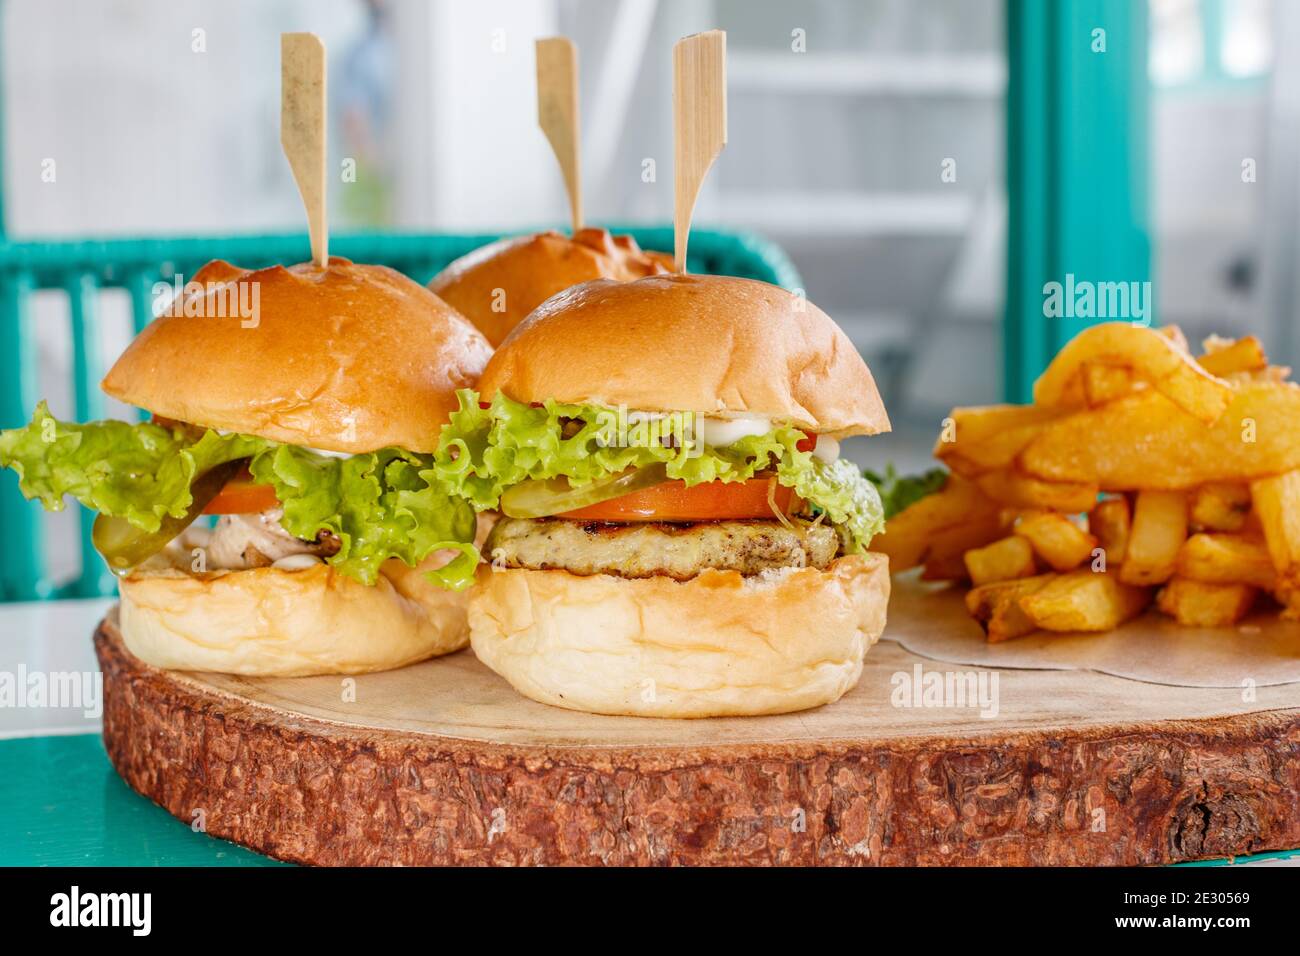 Three fish sliders (mini burgers) with lettuce, tomato and pickles, served with french fries on a wooden tray. Stock Photo